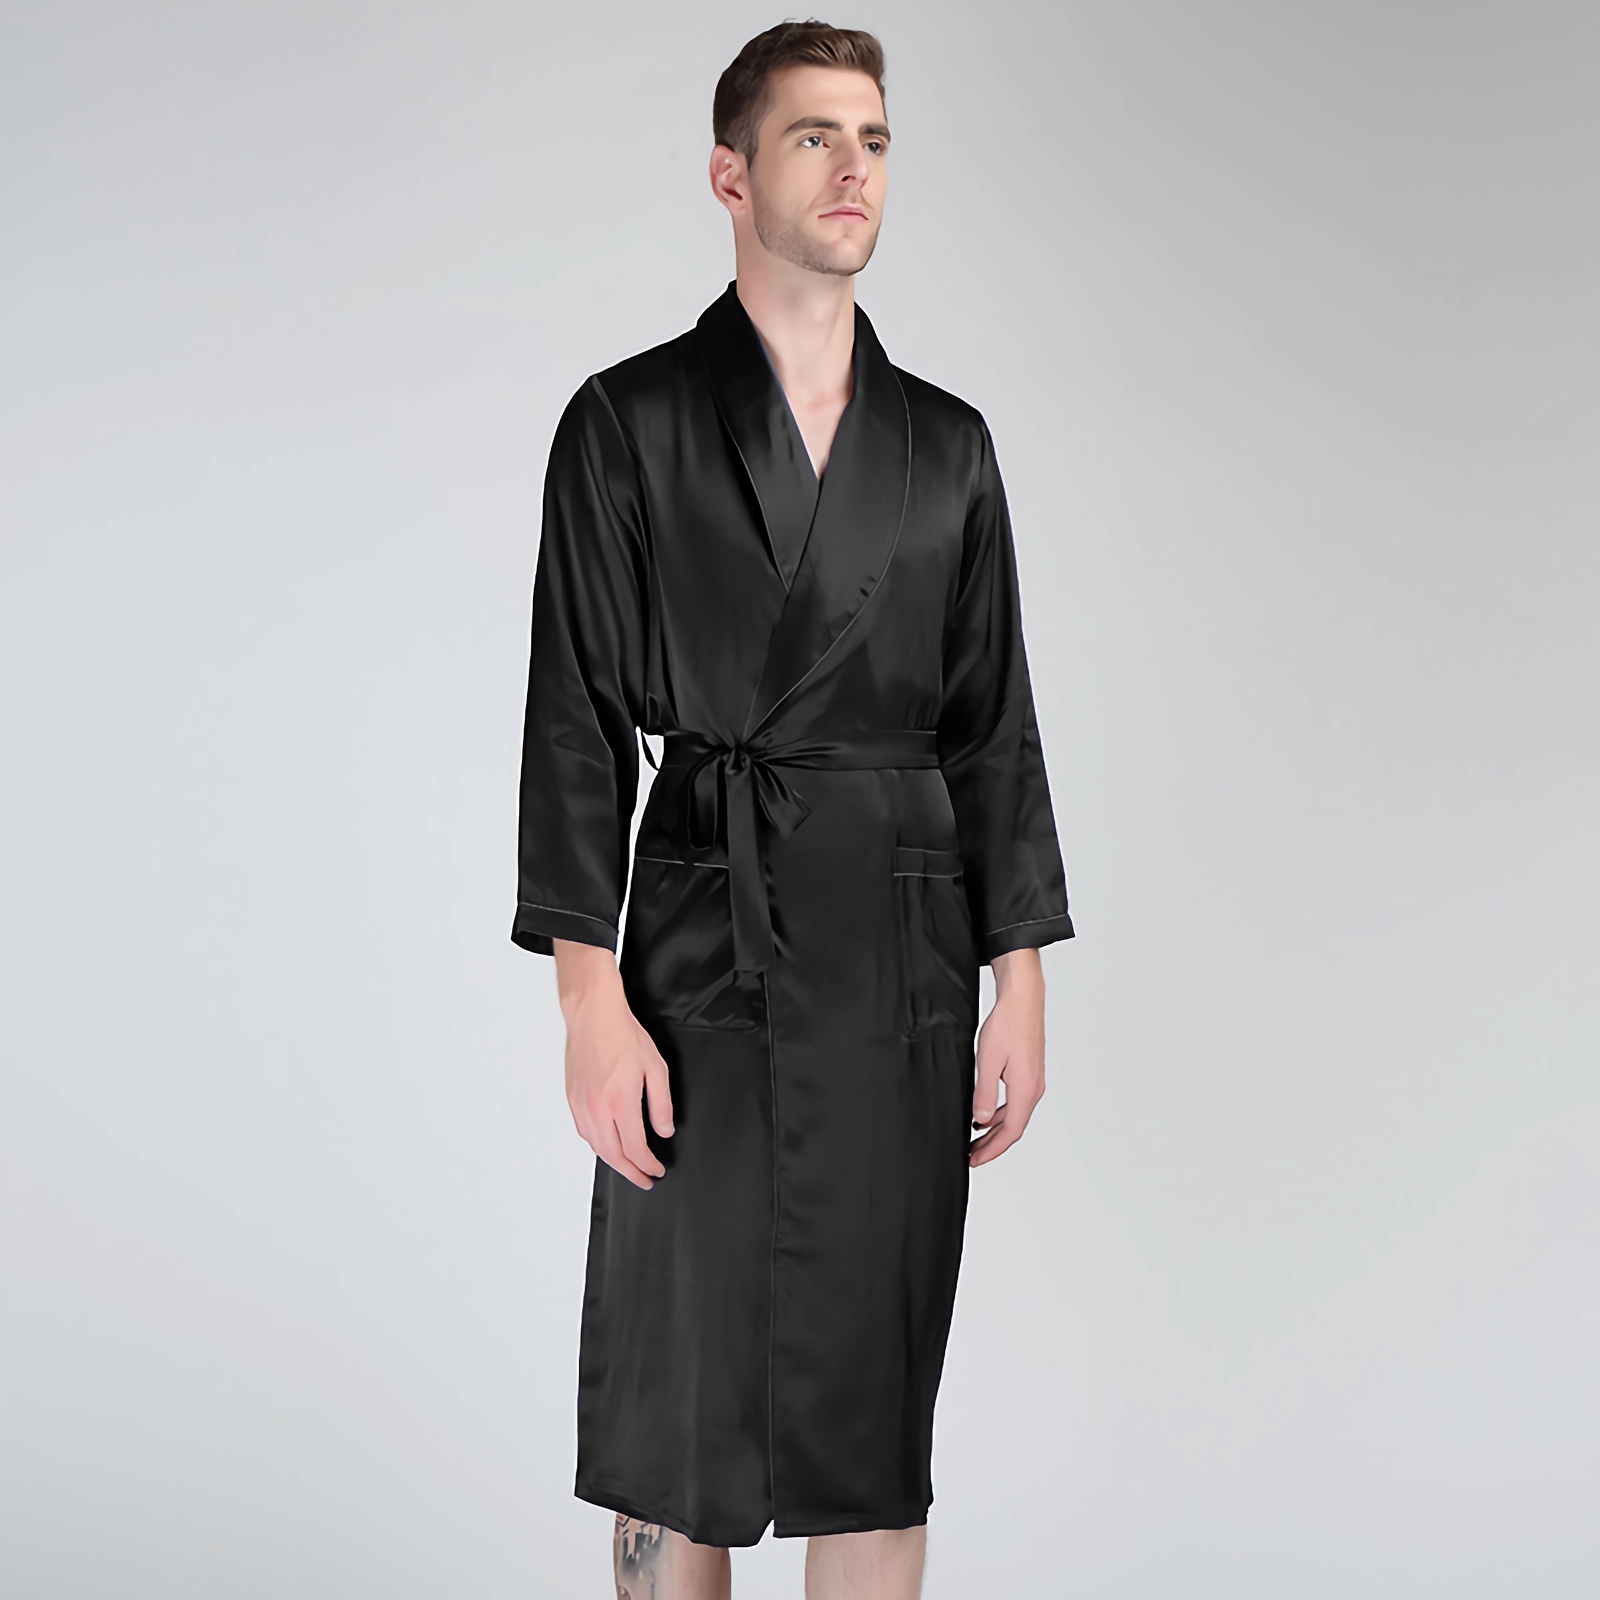 22 momme Silk Robe Solid Men's Long-sleeved High-end Style REAL SILK LIFE